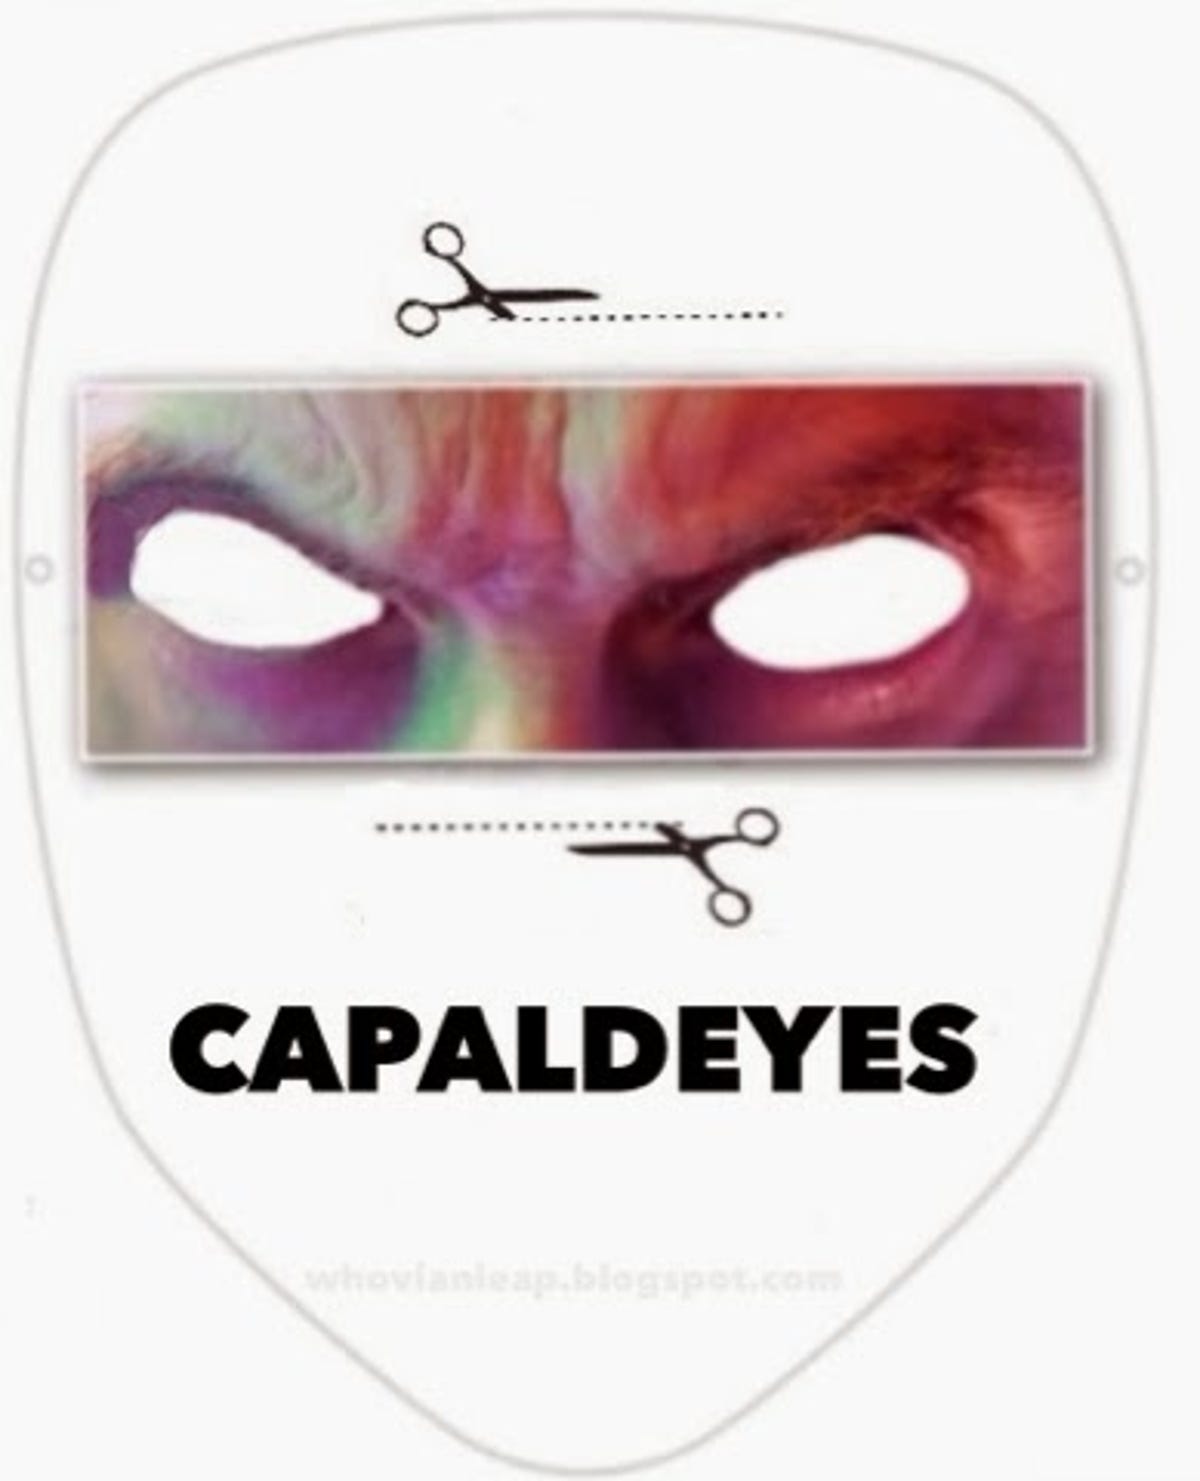 Print out your own pair of Capaldeyes to watch the new "Doctor Who."